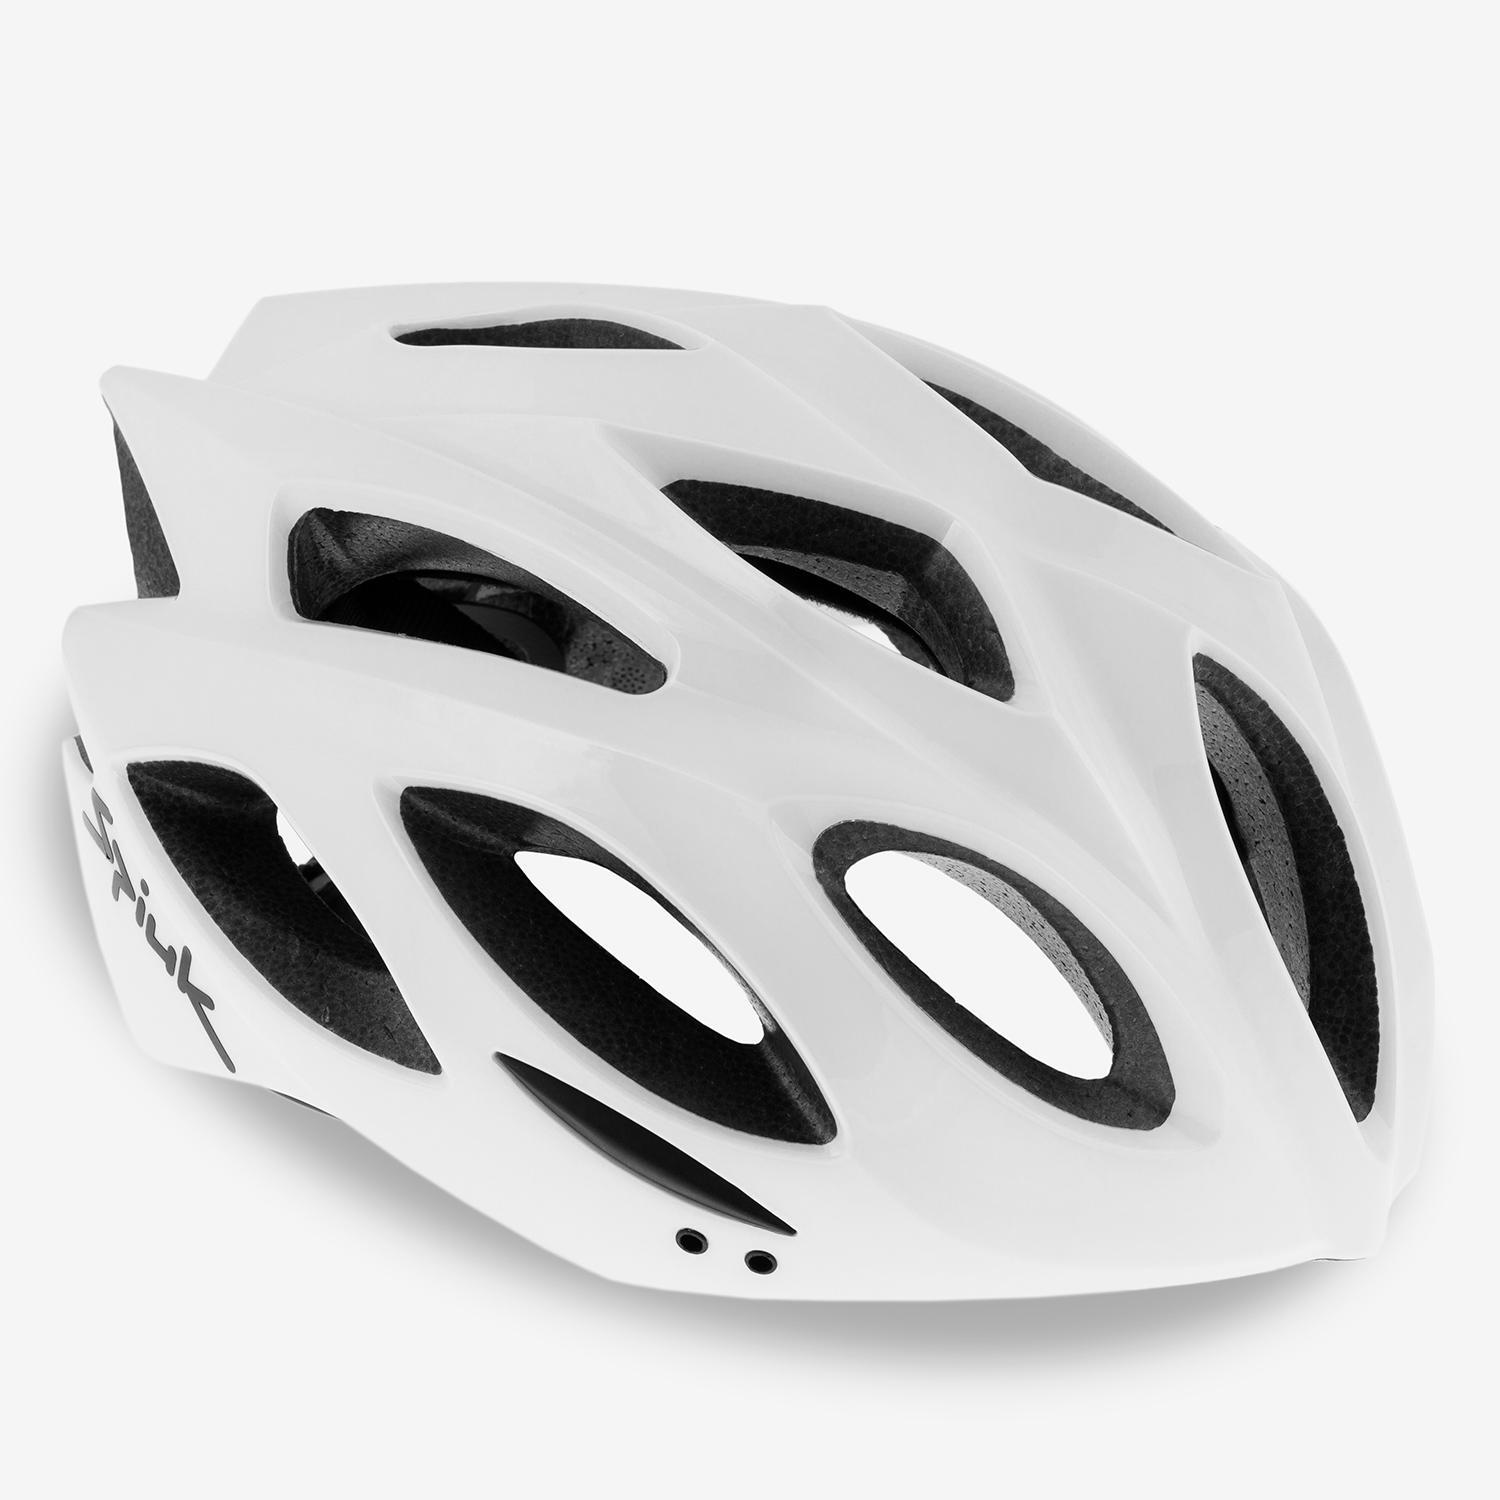 Spiuk Rhombus-Blanc-Casque Vélo sports taille S